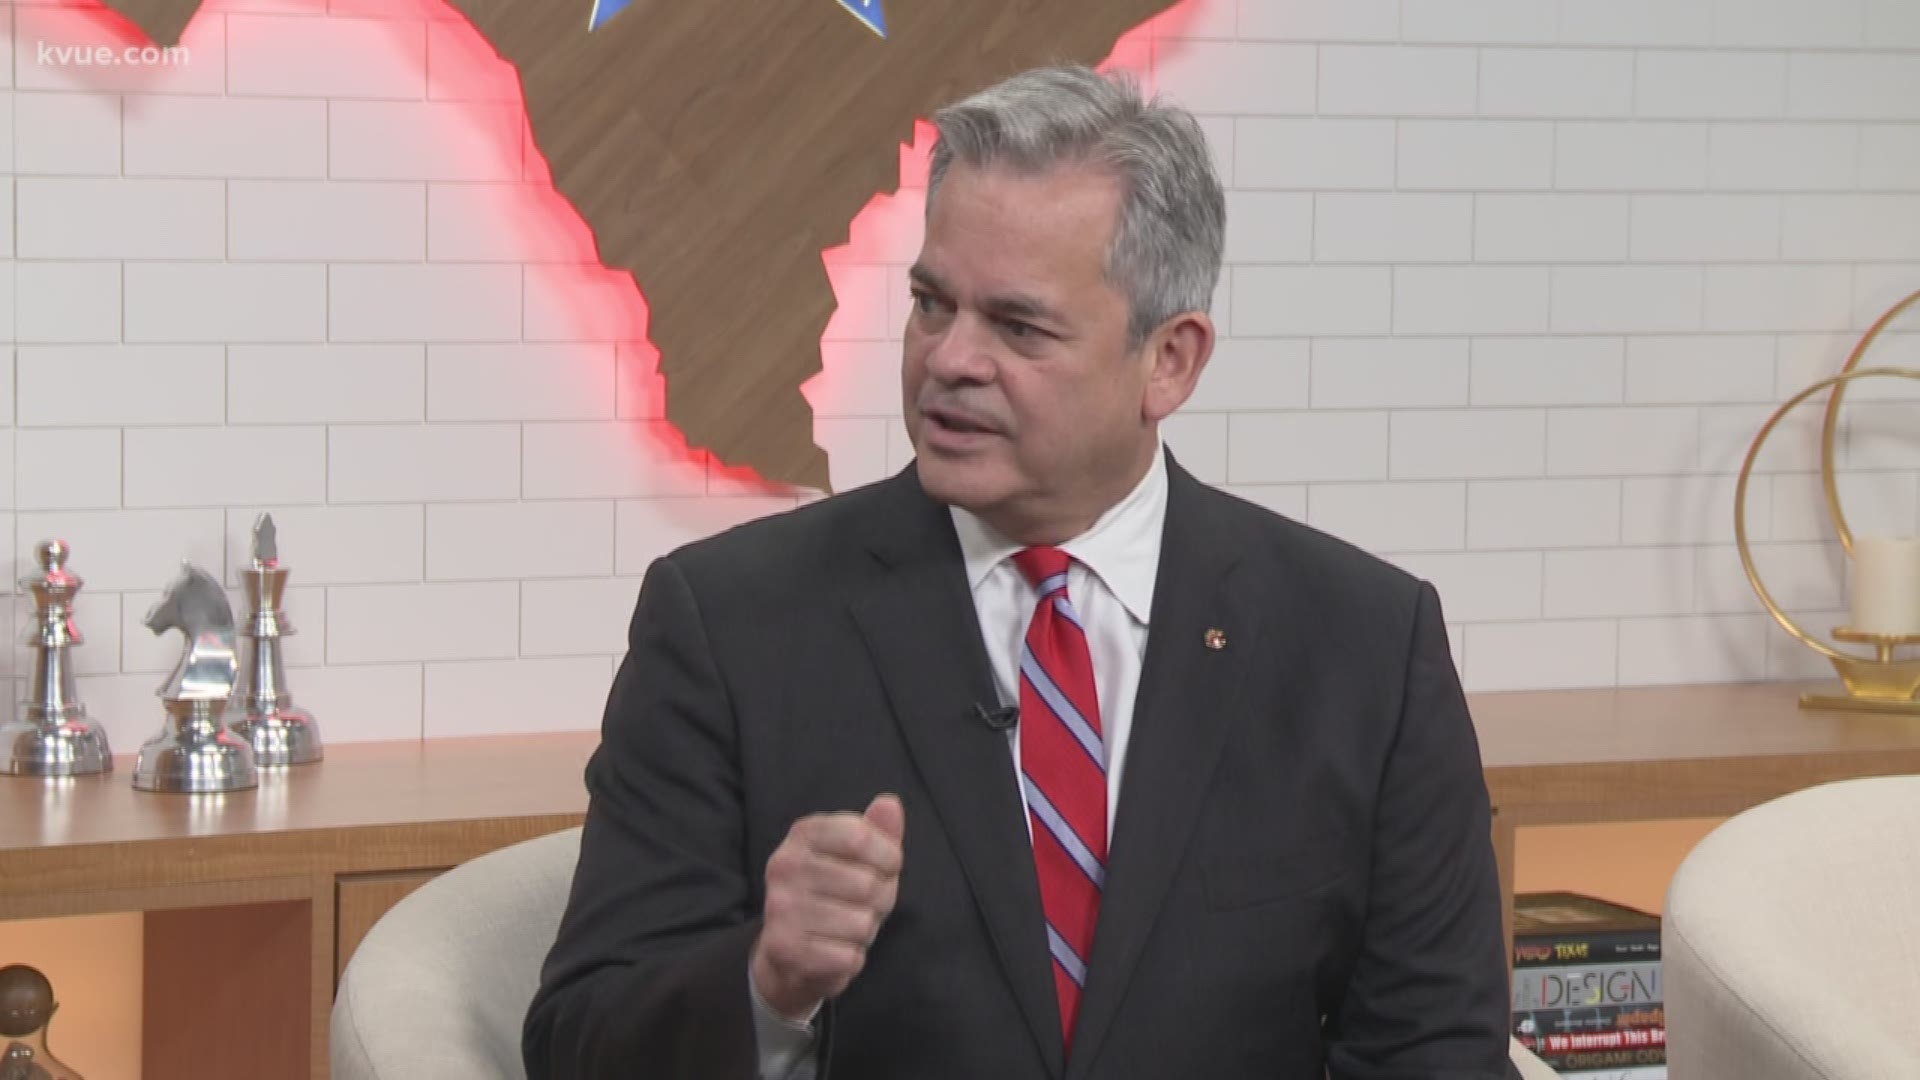 Austin Mayor Steve Adler joined KVUE for his weekly visit to discuss Gov. Abbott's recent remarks on the council's vote to allow the homeless to set up tents or camps in Austin.